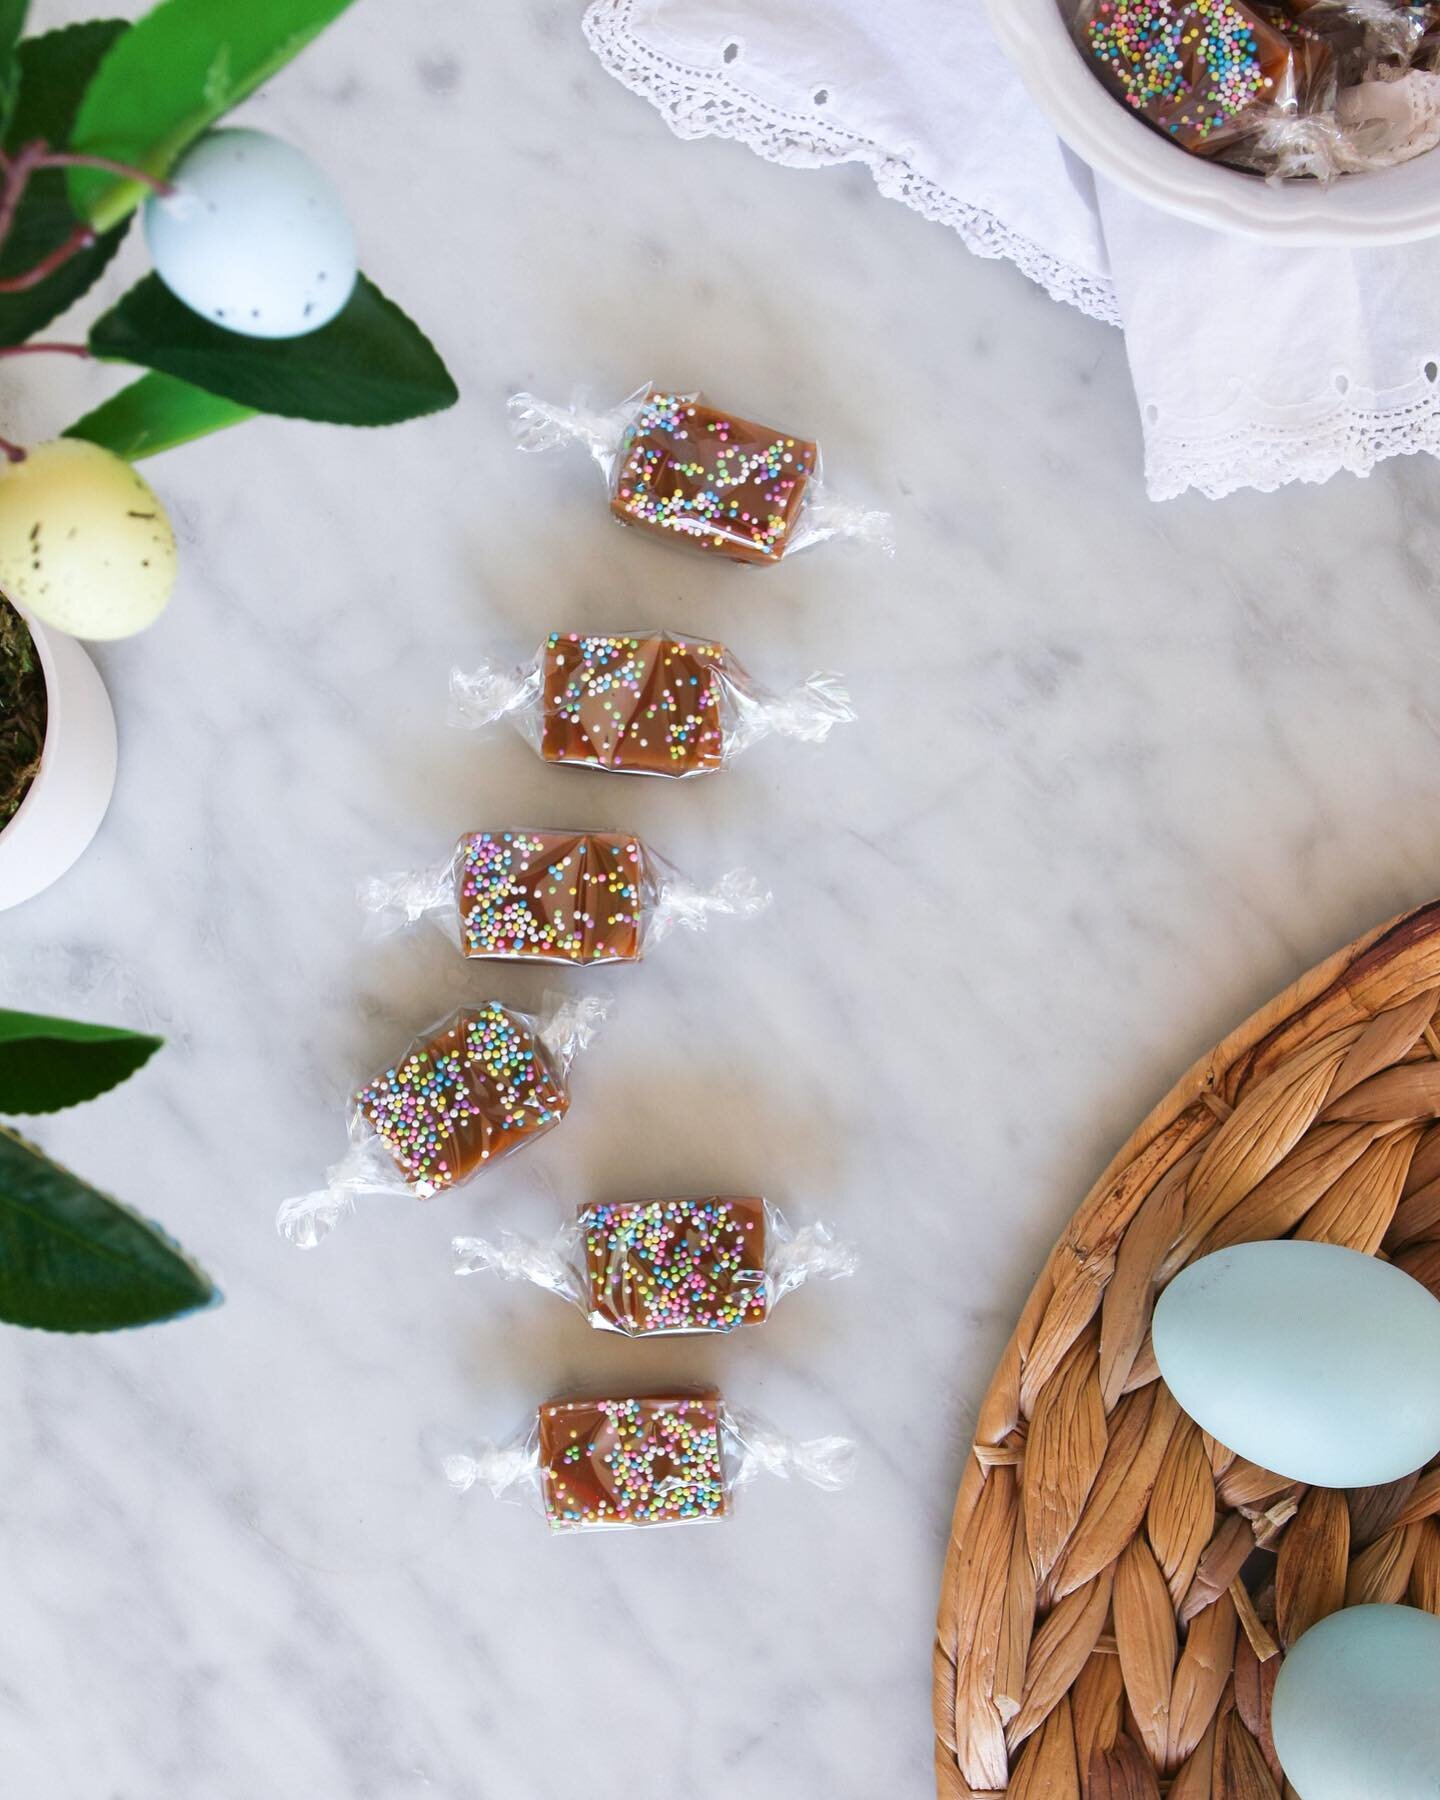 Happy Easter! 🐇🐰🐣🌸🌷 Have you ordered your Easter Caramels already?!
.
.
#caramels #eastercandy #thefeedfeed #thebakefeed #bayareafoodies #bayareabuzz #womeninbiz